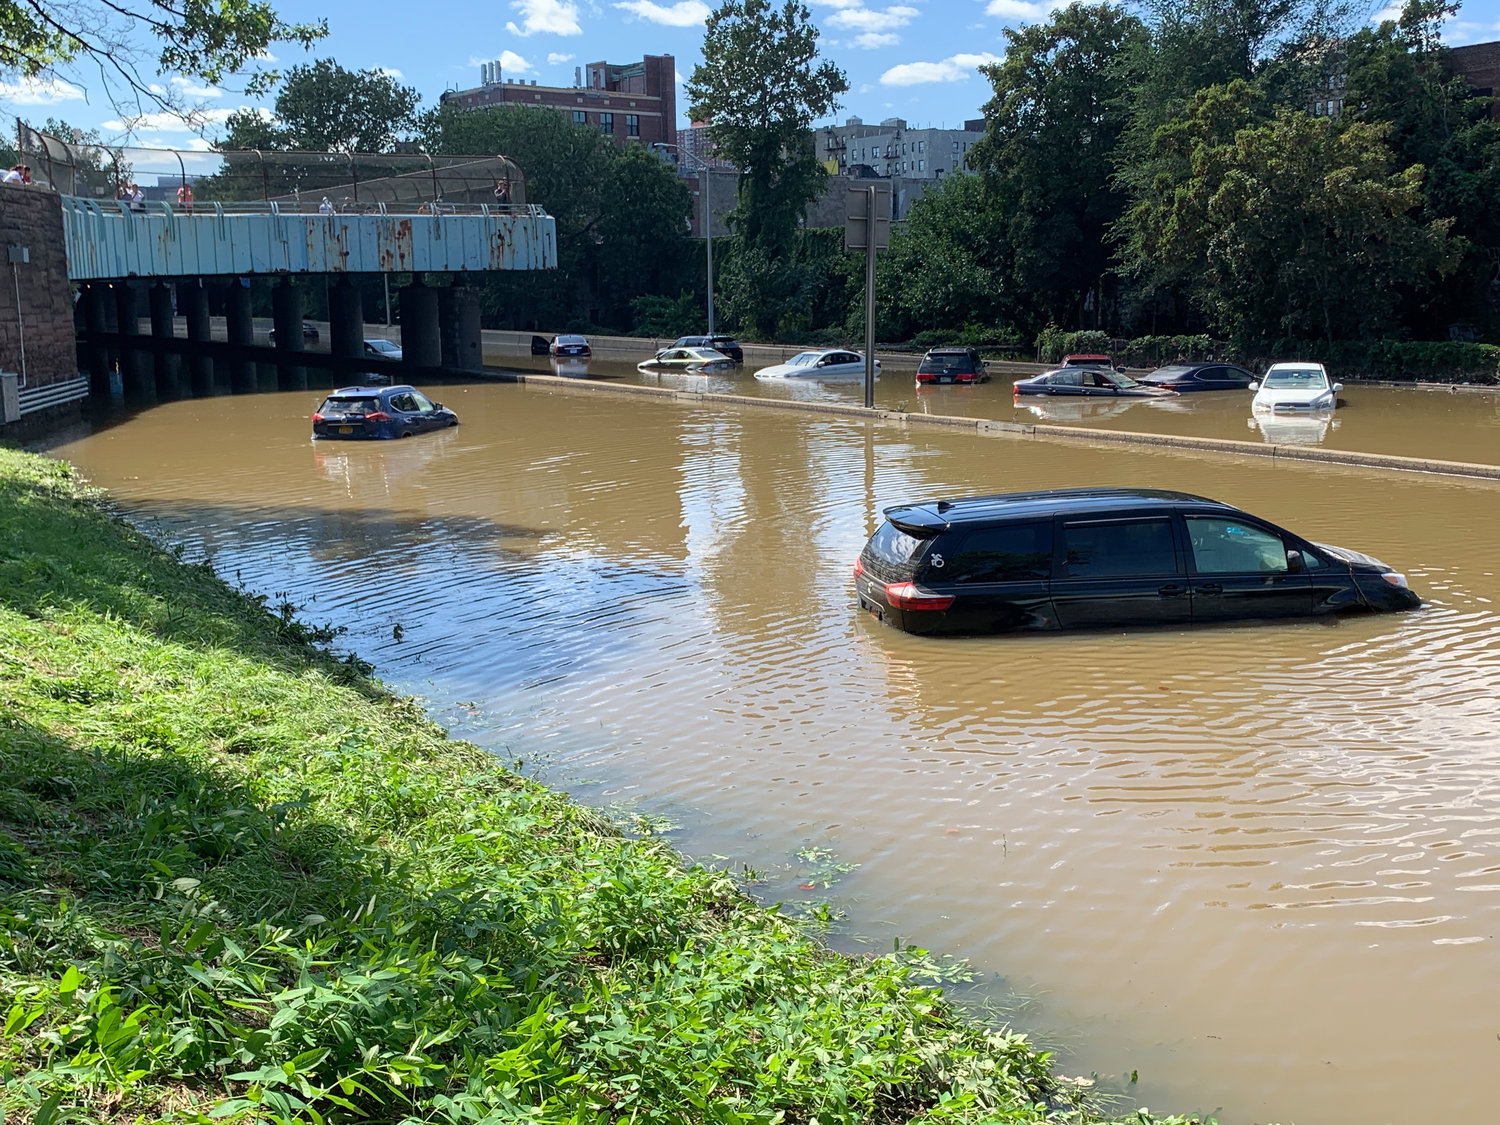 Large sections of the Major Deegan Expressway was shut down through Kingsbridge after massive flooding turned the expressway into river. Cars, trucks and even tour buses were abandoned along the way.